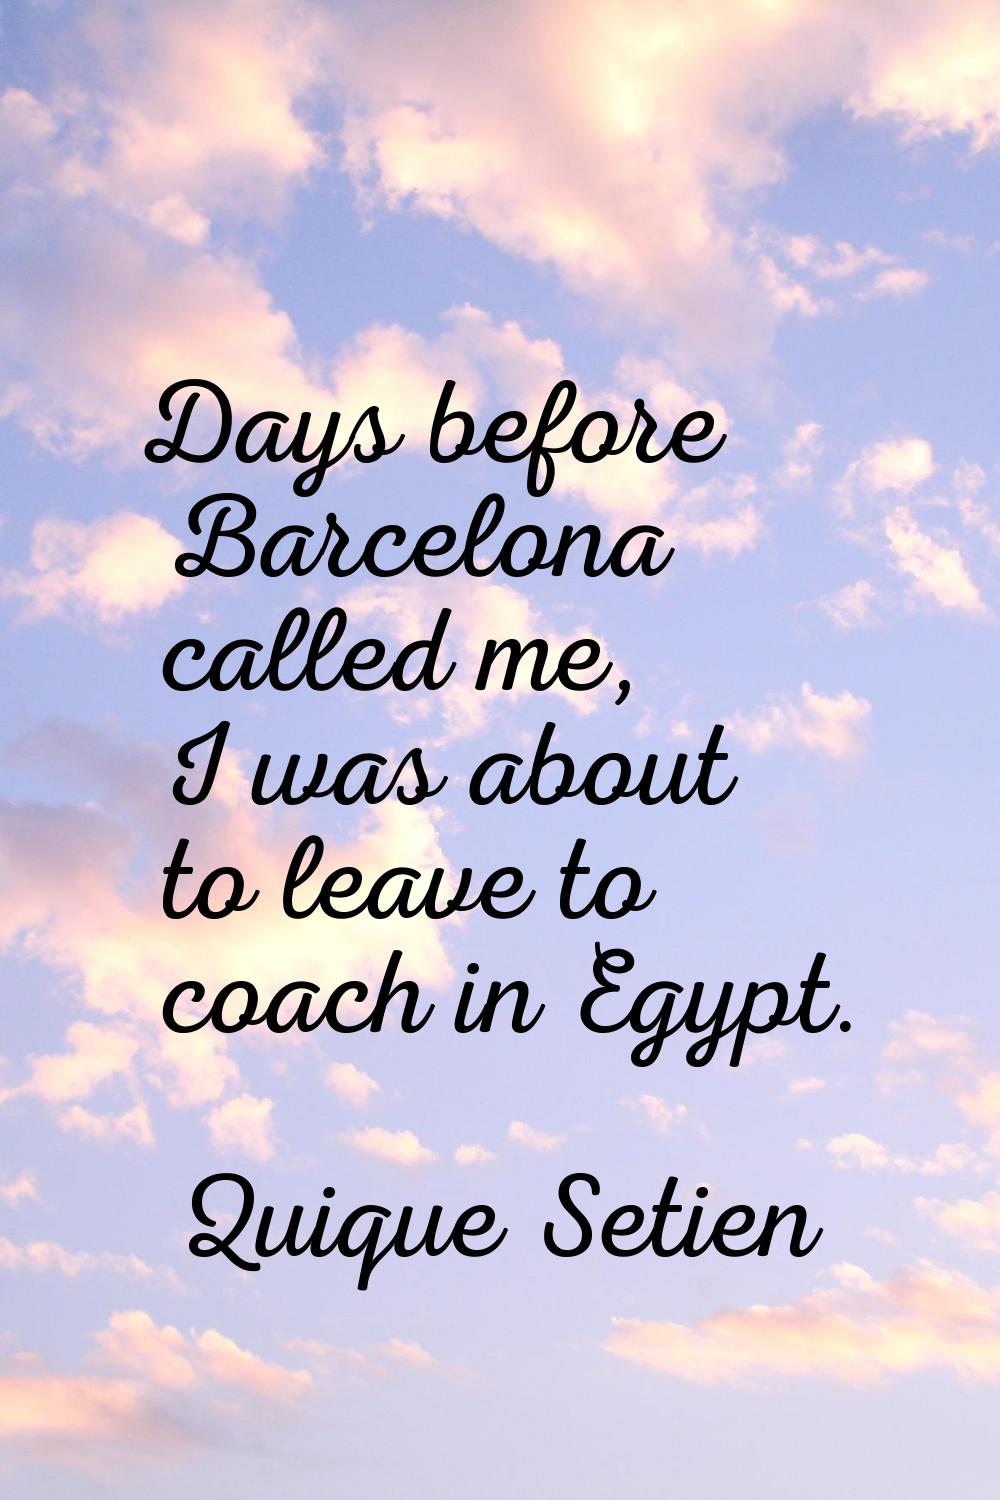 Days before Barcelona called me, I was about to leave to coach in Egypt.